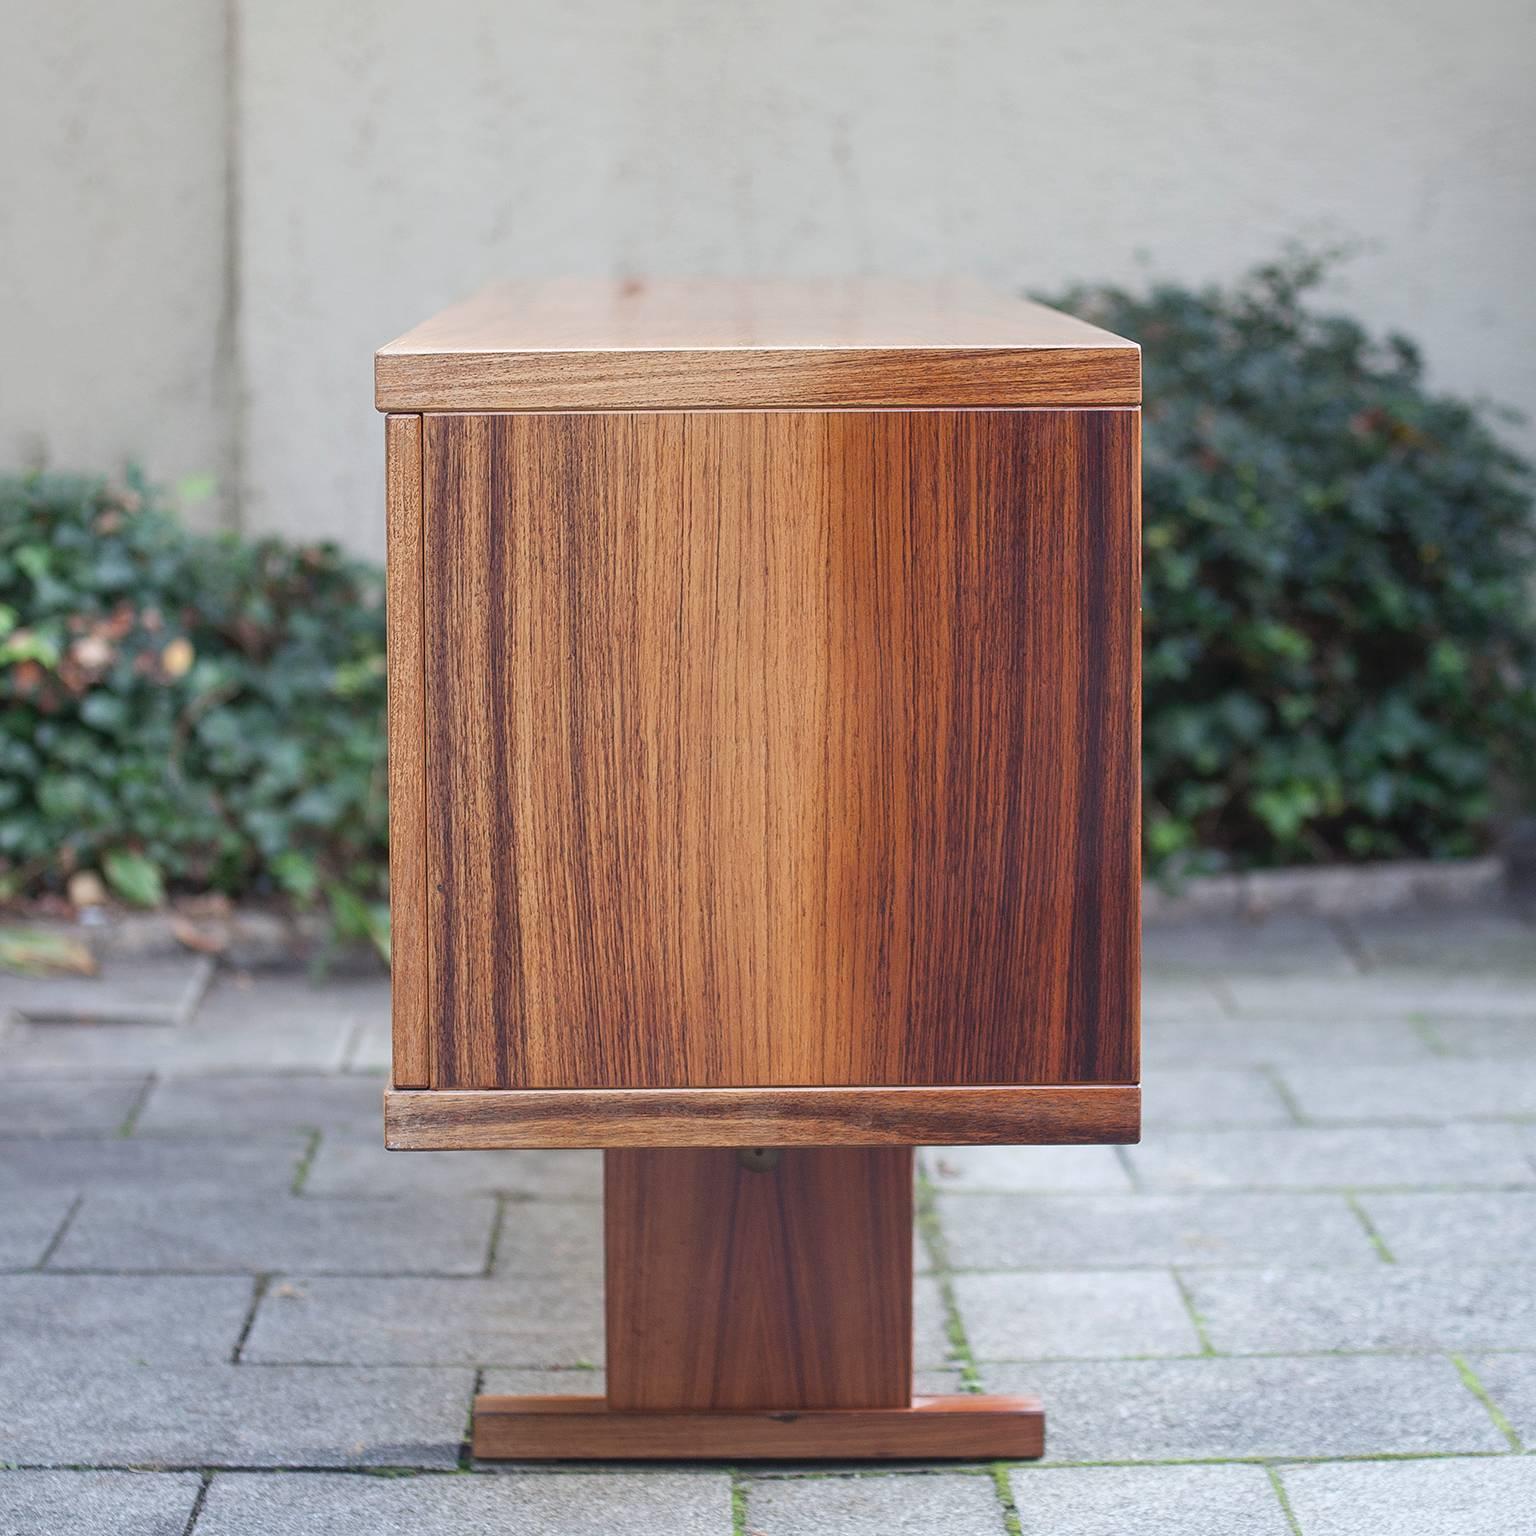 Late 20th Century Rosewood Sideboard with Ceramic Doors by Oxart Schweden, 1978